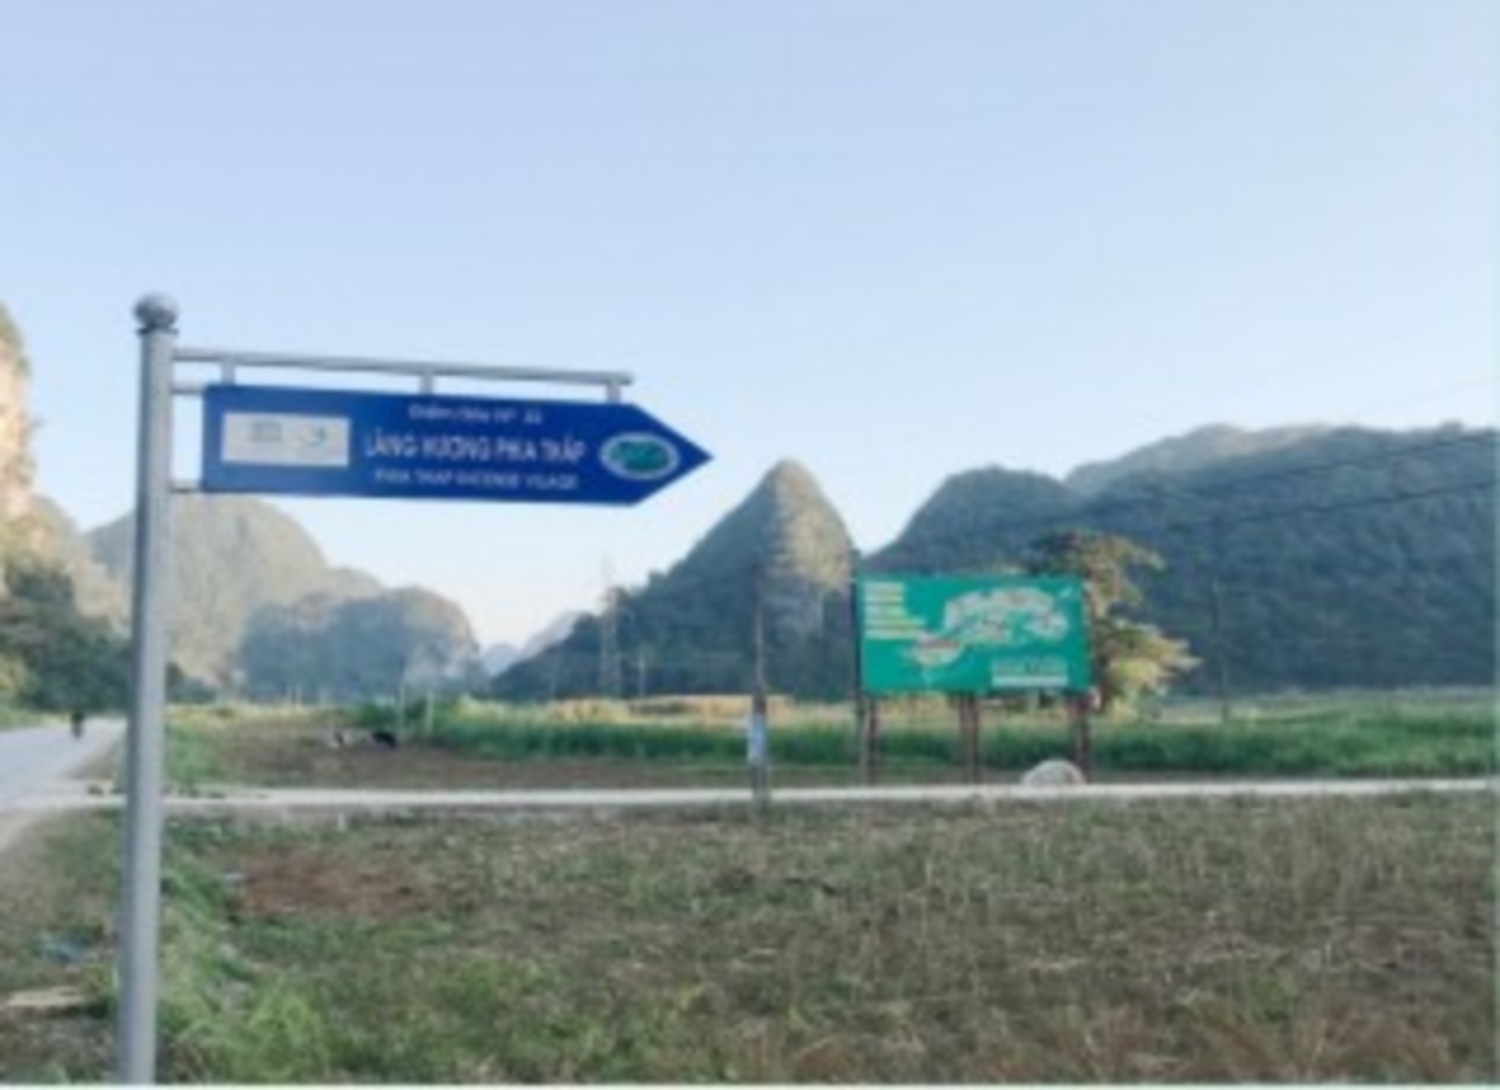 Survey on direction panel positioning for heritage site in Non nuoc Cao Bang UNESCO global geopark